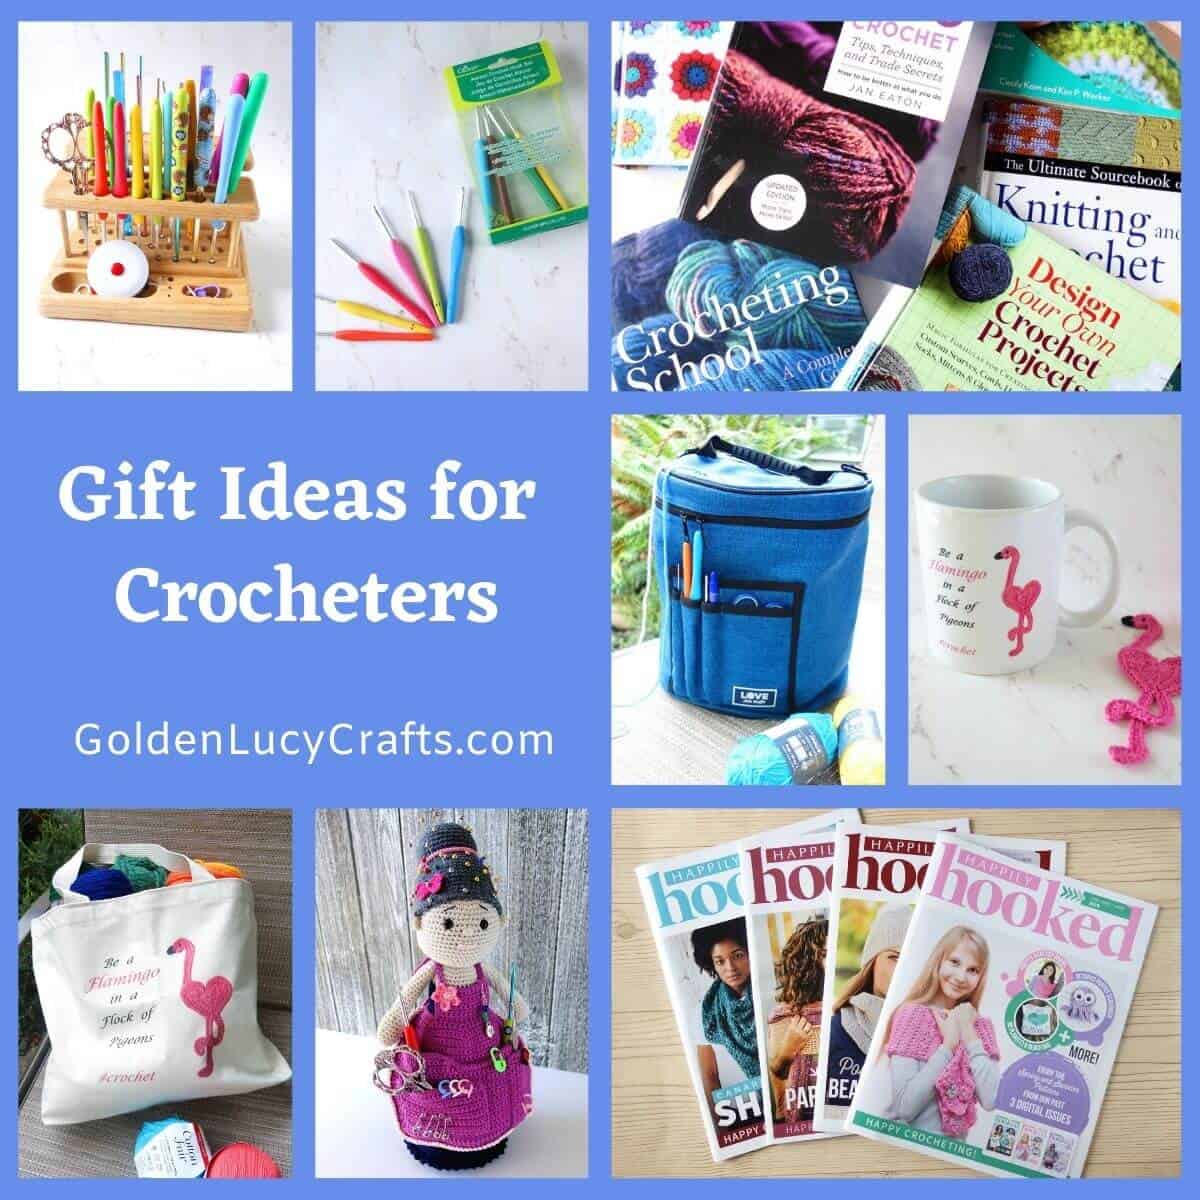 Photo collage of gift ideas for crocheters.